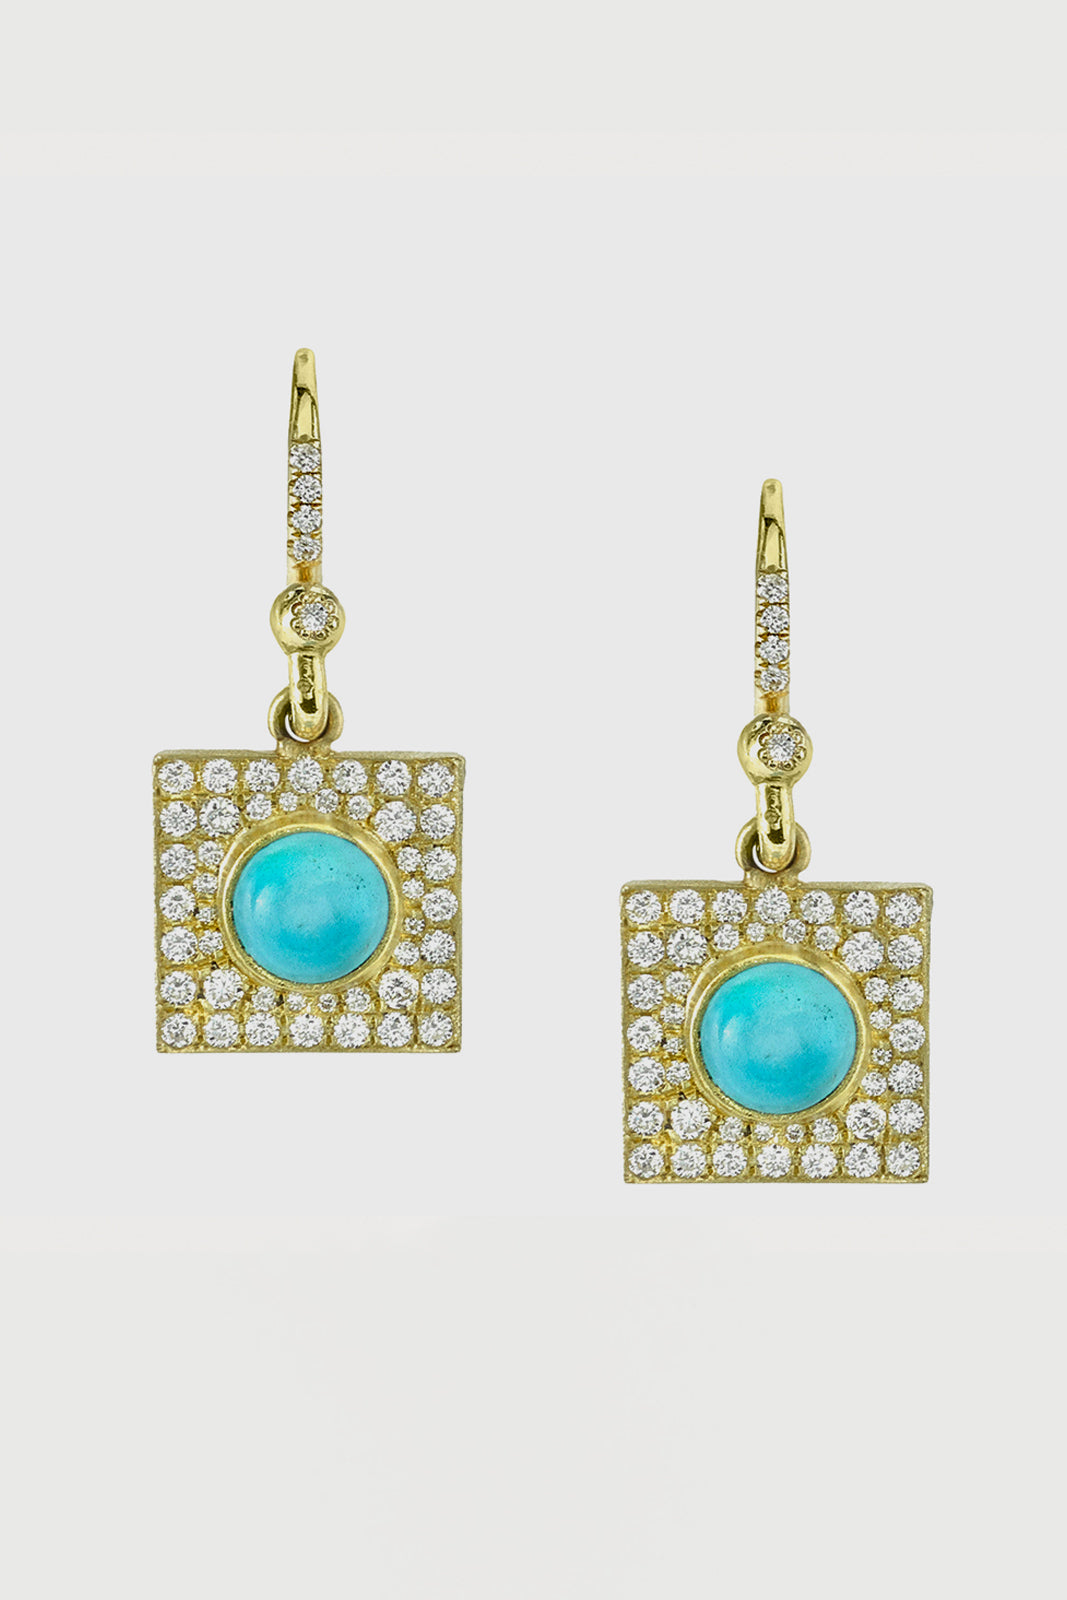 18K Yellow Gold Square Turquoise and Diamond Earrings